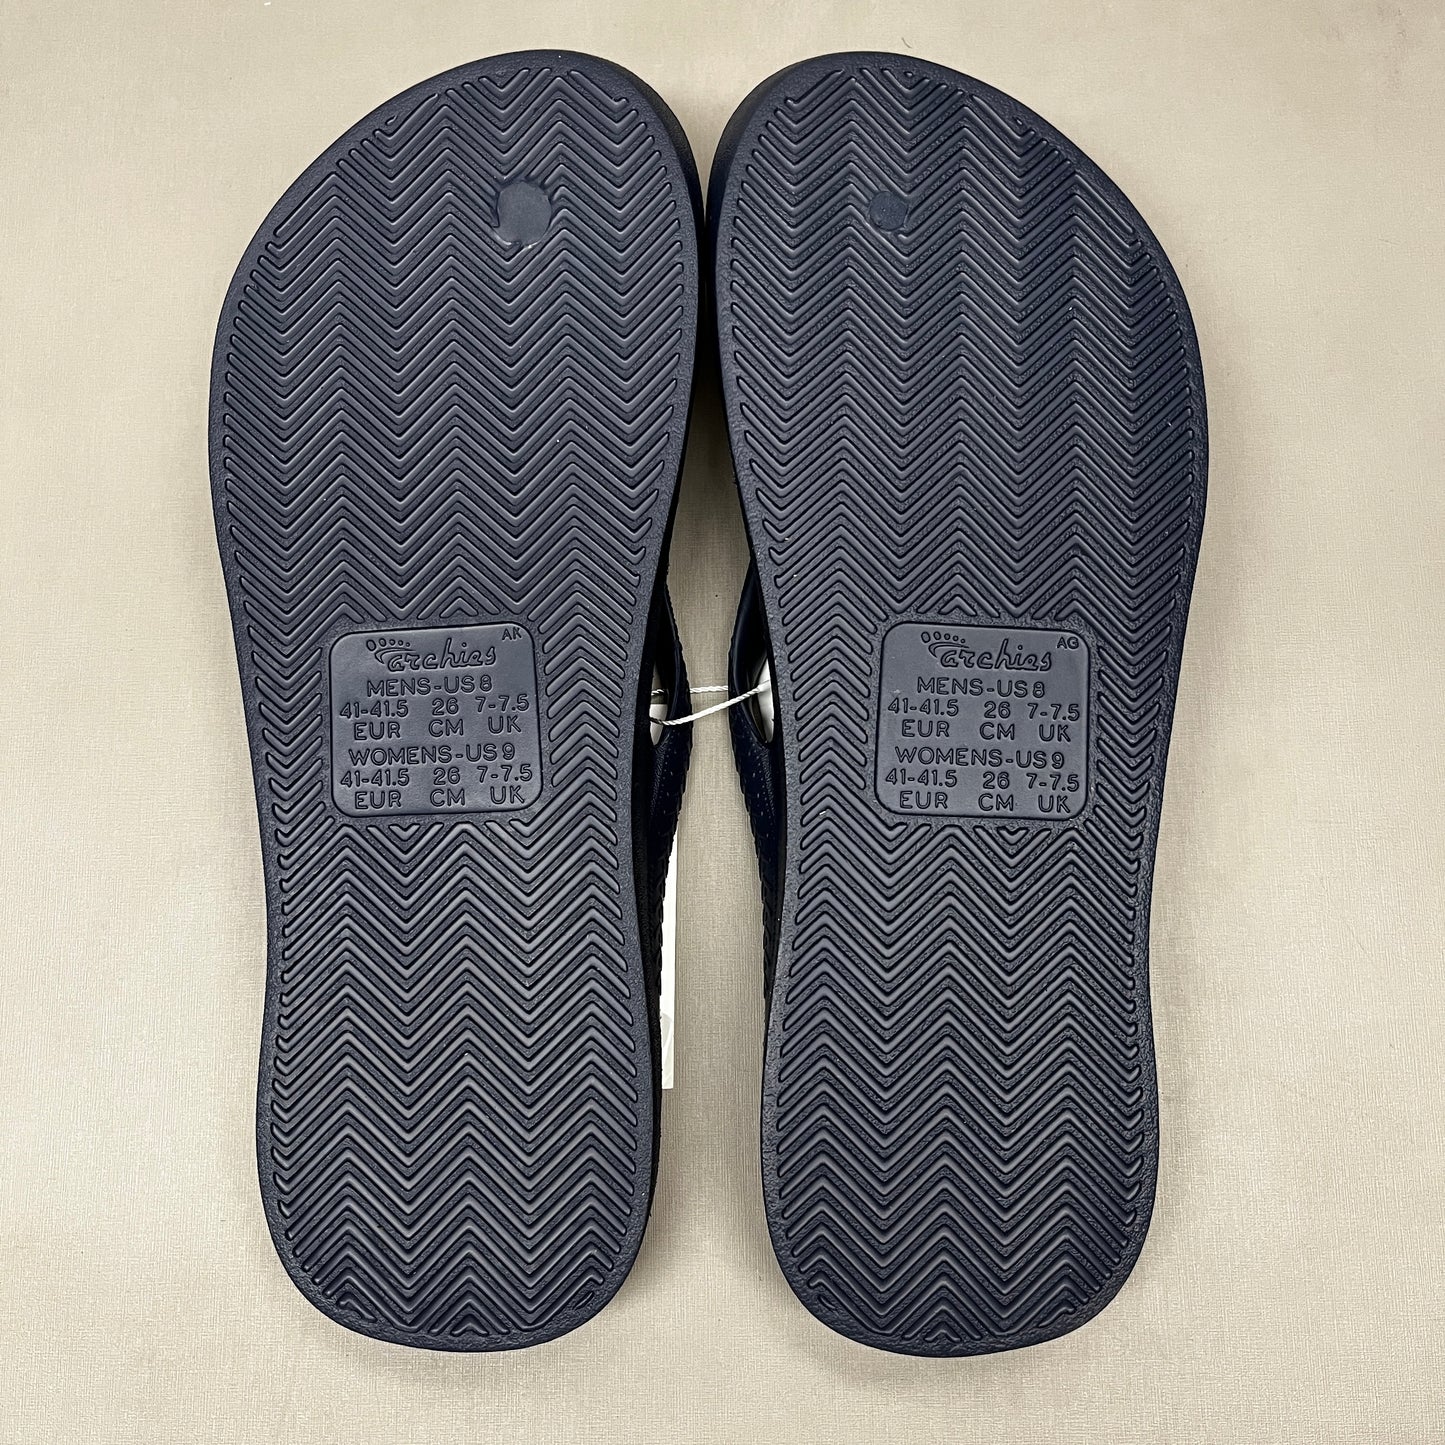 ARCHIES Arch Support Thongs HIGH SUPPORT Flip Flops Men's Sz 15 Navy Blue (New)